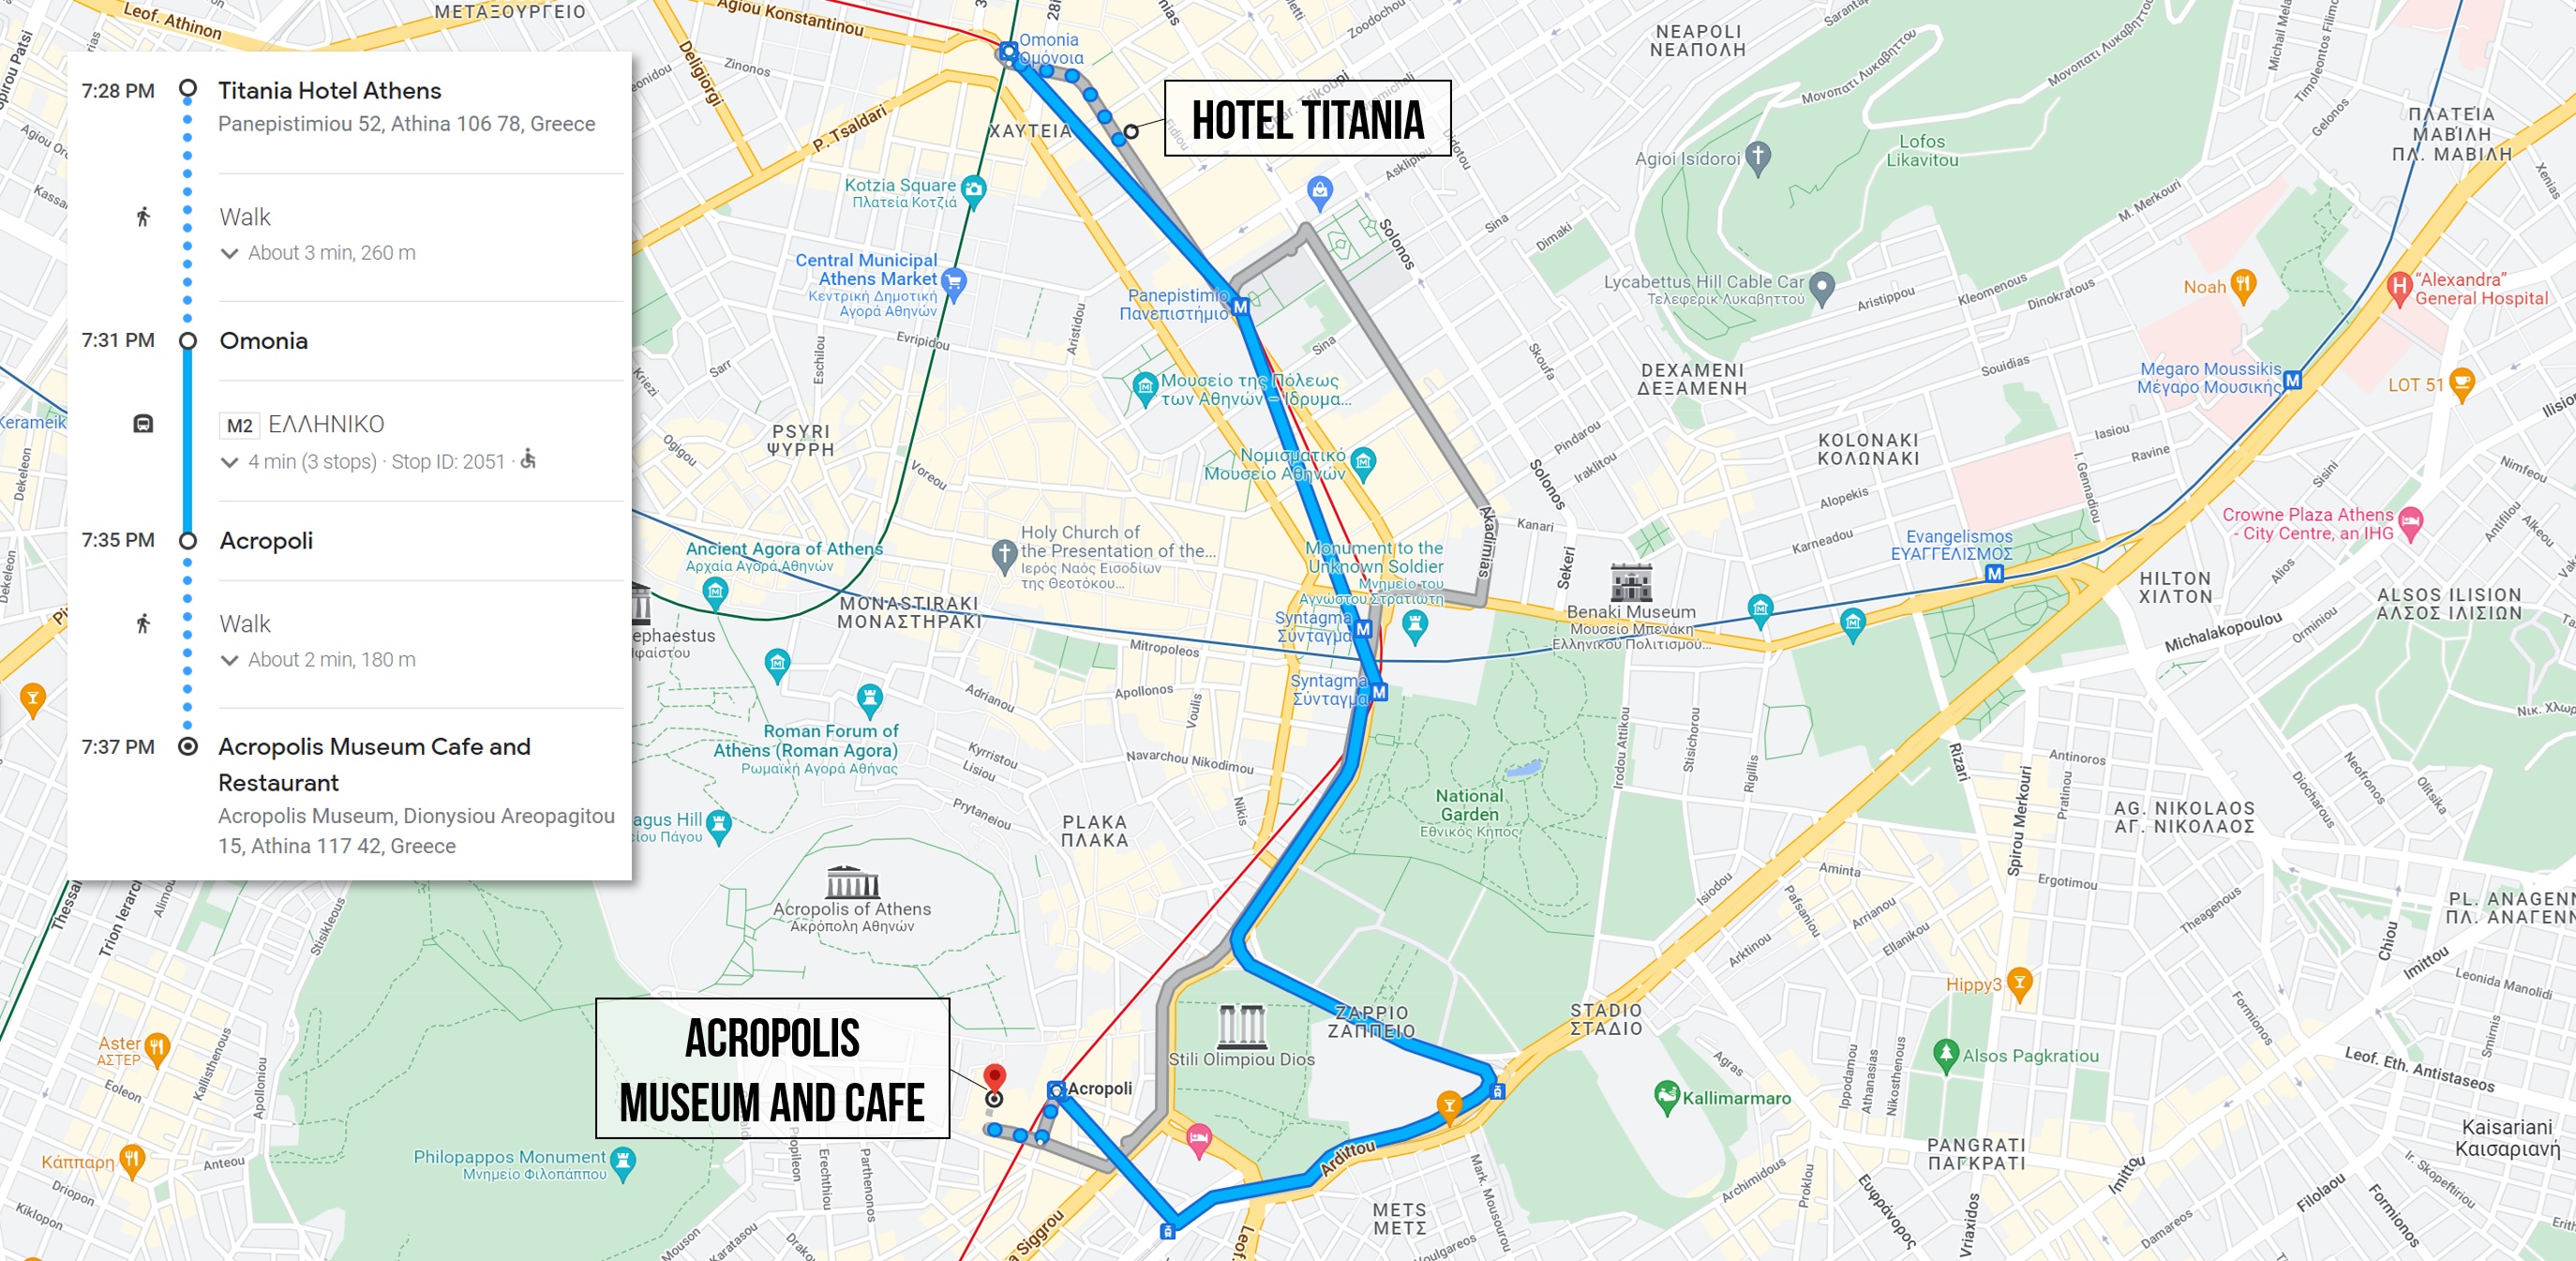 A map of the metro route from the Hotel Titania to the Acropolis Museum and Cafe.